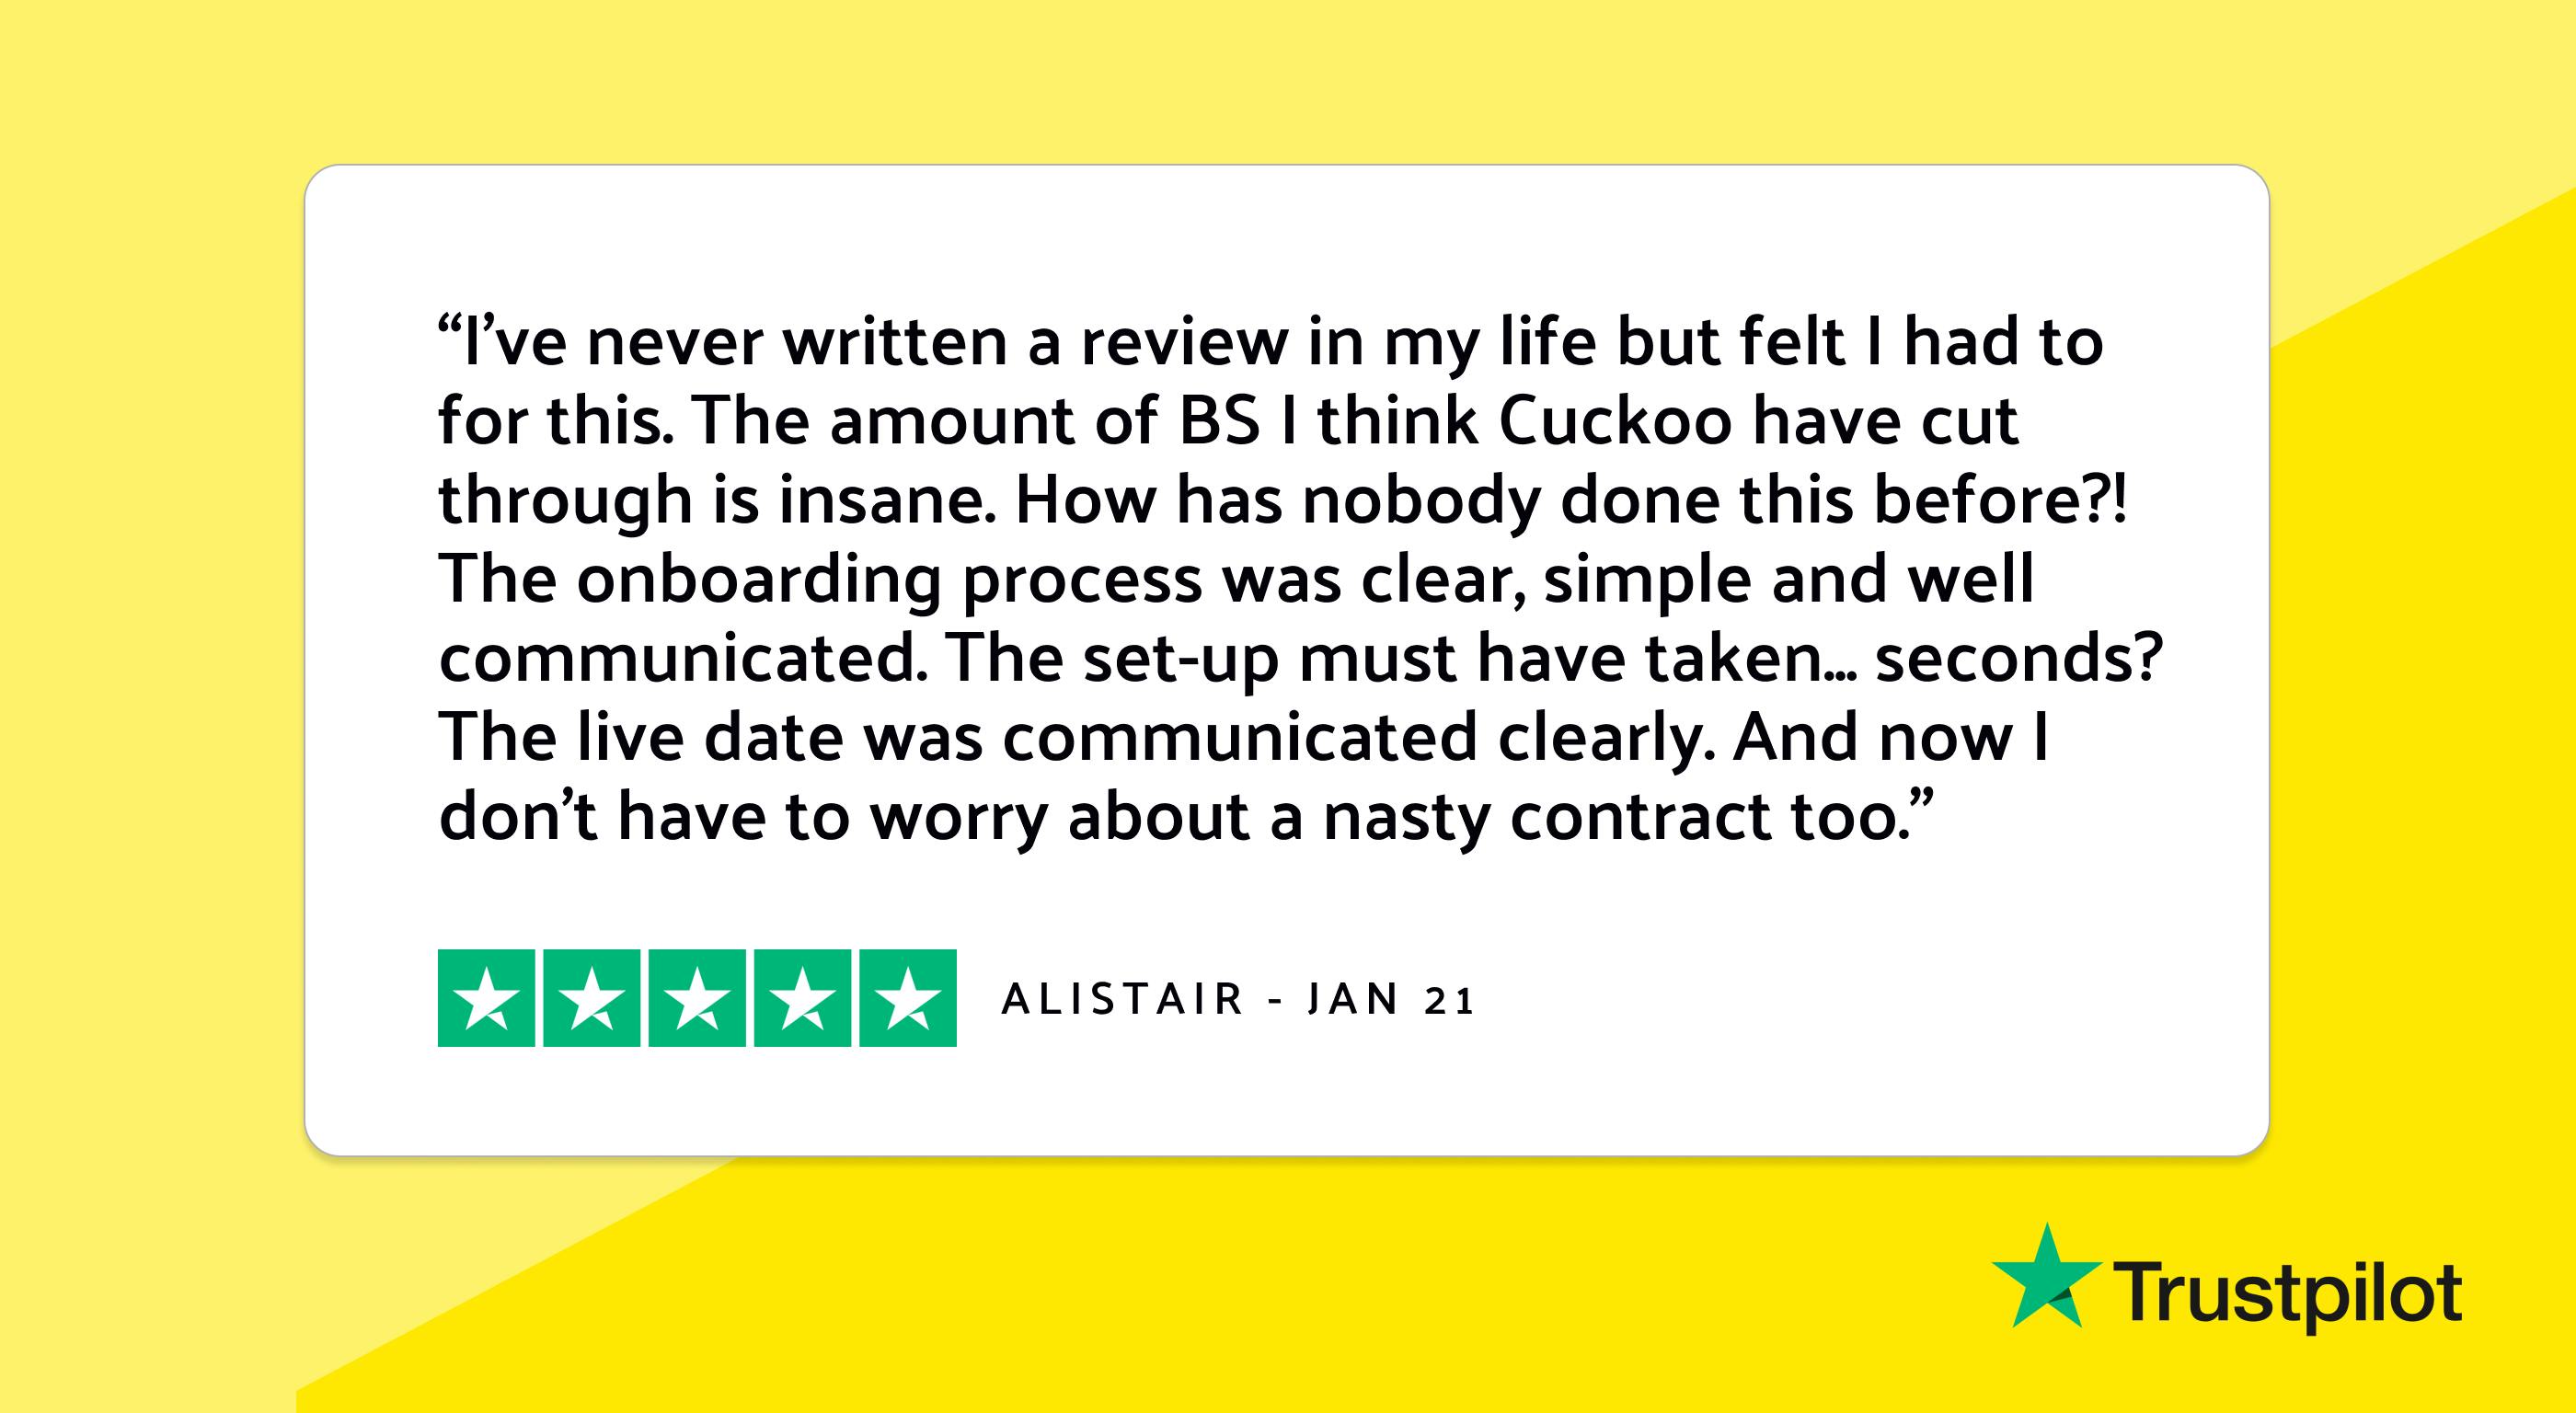 Trustpilot review: "I've never written a review in my life but felt I had to for this. The amount of BS I think Cuckoo have cut through is insane. How has nobody done this before?! The onboarding process was clear, simple and well communicated. The set-up must have taken... seconds? The live date was communicated clearly. And now I don't have to worry about a nasty contract too."